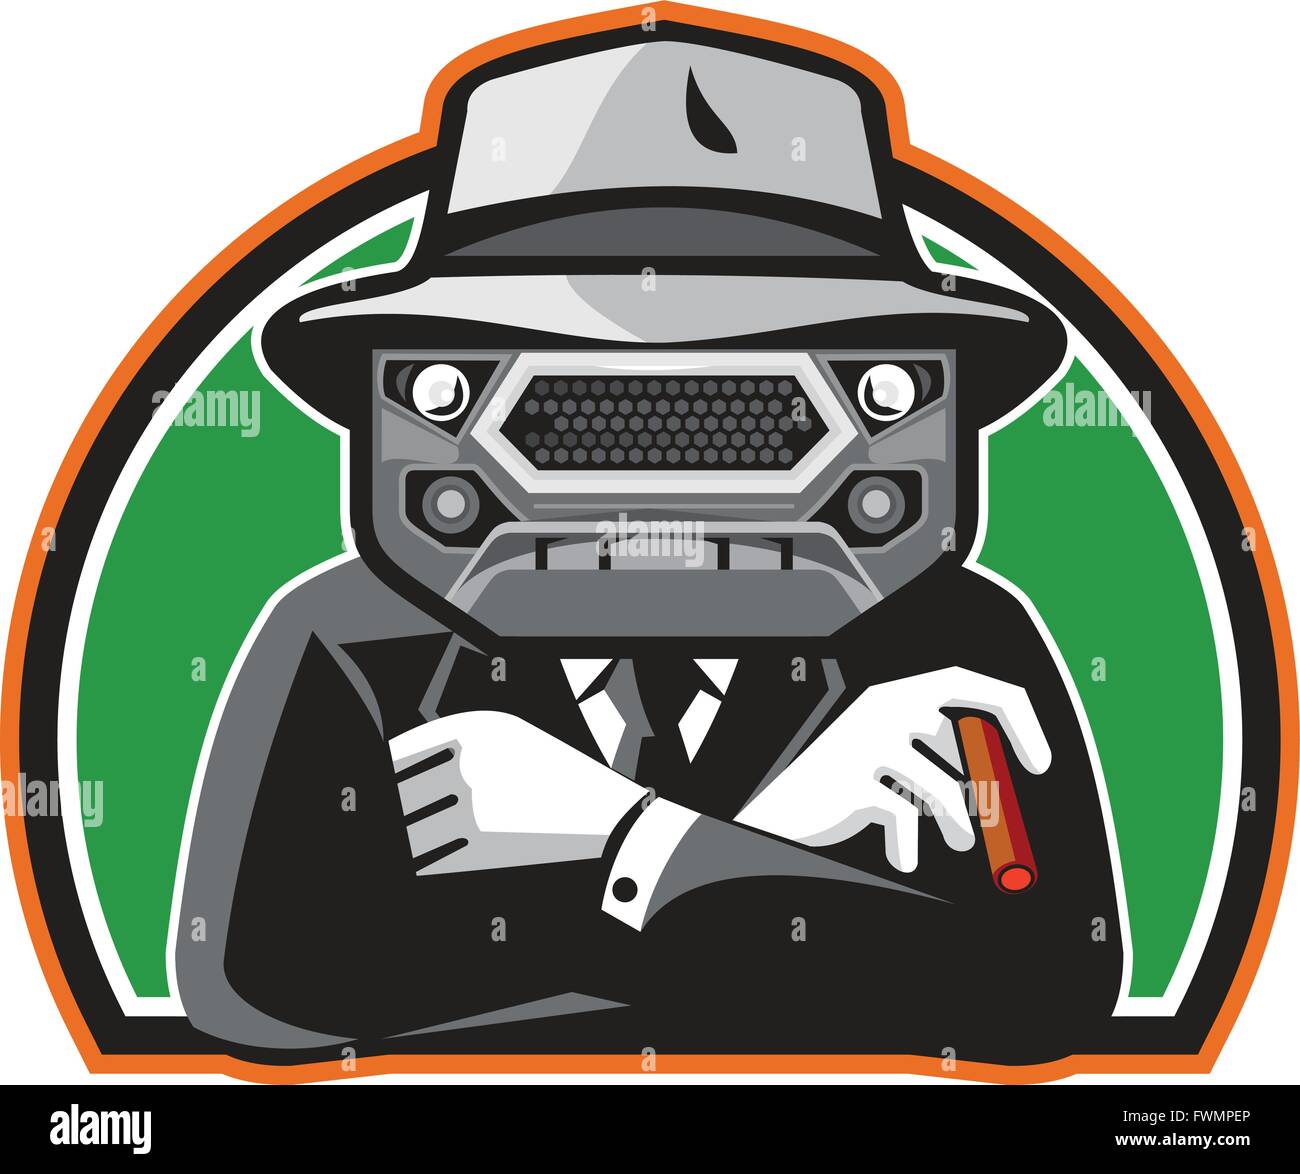 Illustration of an angry mobster with car grille grill face wearing hat , tie and suit arms folded facing front set inside half Stock Vector